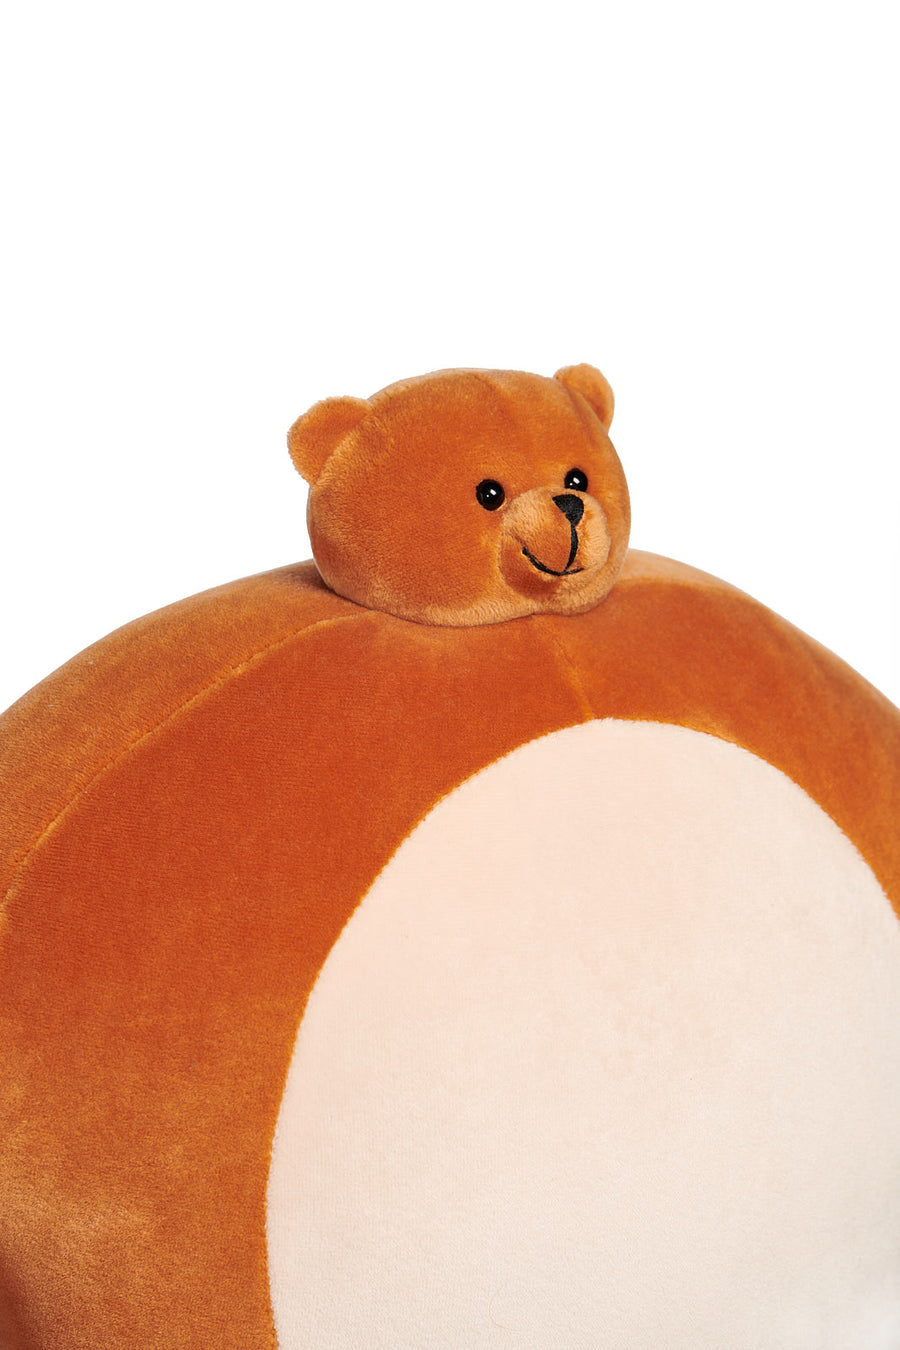 New Cute Factory Price Large Soft Toy Pillow Teddy Bear Stuffed